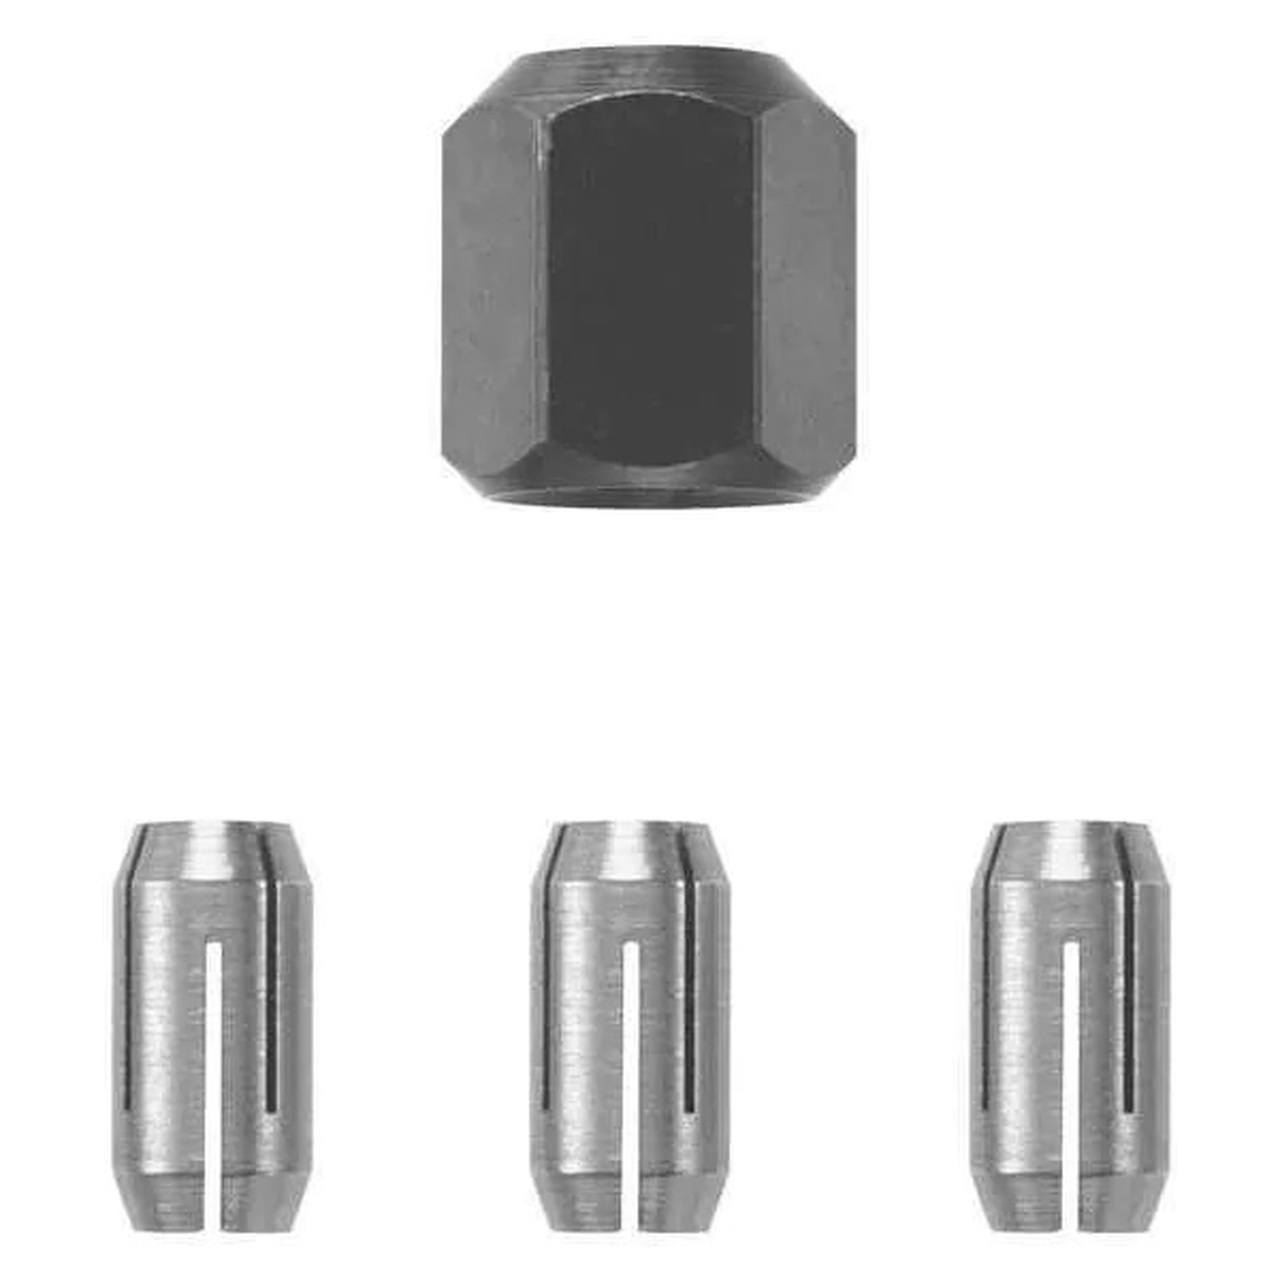 CN1 99318.1610050129 Replacement Collet & Collet nut kit (alternate r